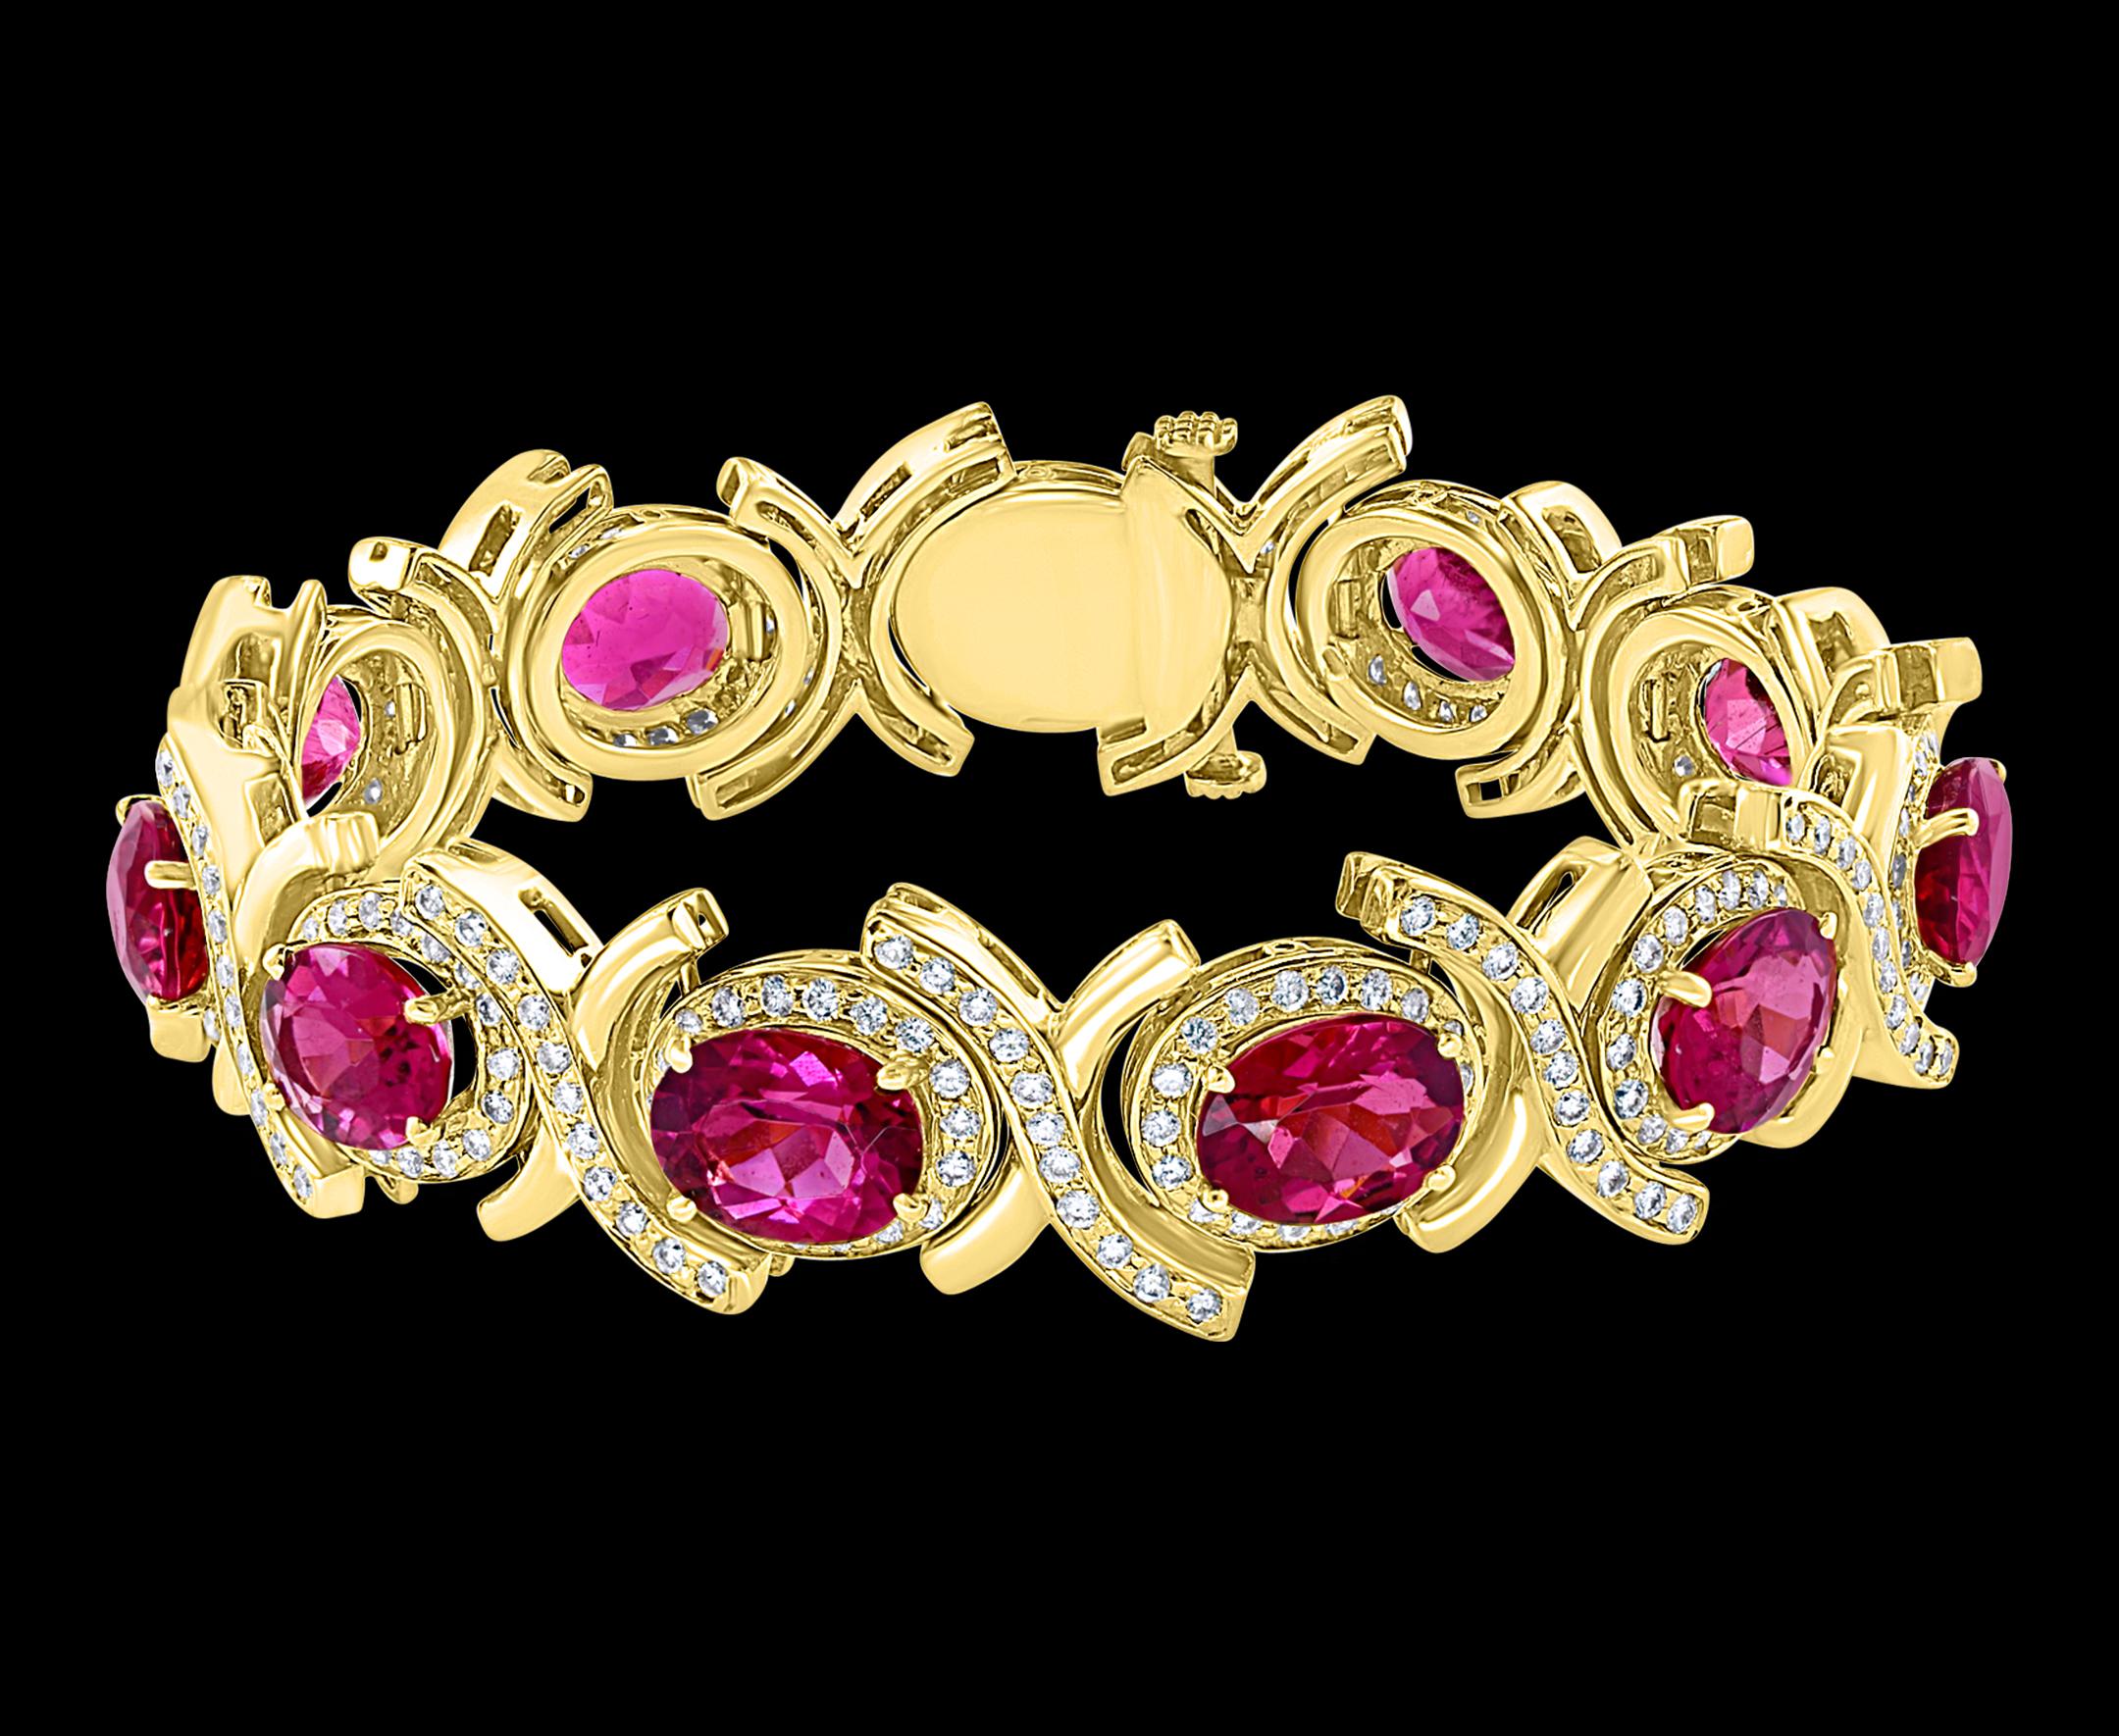 Approximately 35 Carat Pink Tourmaline & 4.5 Carat Diamond Bracelet In 14 Karat Yellow Gold
A spectacular jewelry piece.  This exceptional bracelet has 11  Oval shape Pink Tourmaline  stone . Weight of the Pink Tourmaline  is approximately 35 carat